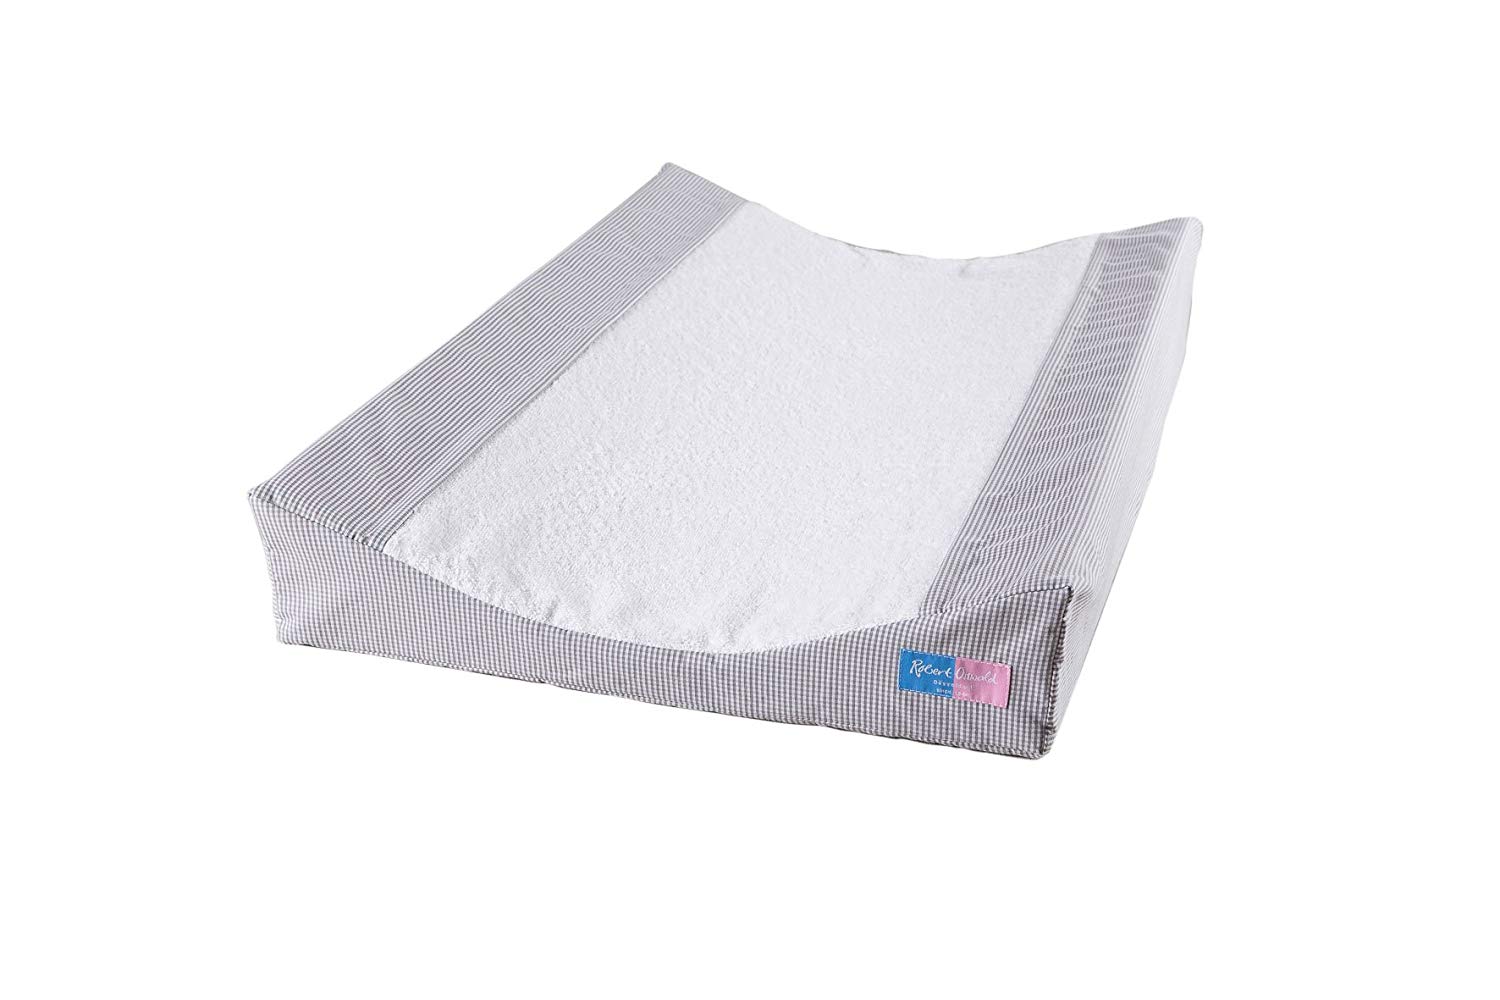 Robert Osswald 1.4.1.3.1.1-K05-11 Changing Mat with 2 Wedge Recess and Terry Cloth Cover and Inlet 45 cm x 70 cm Blue